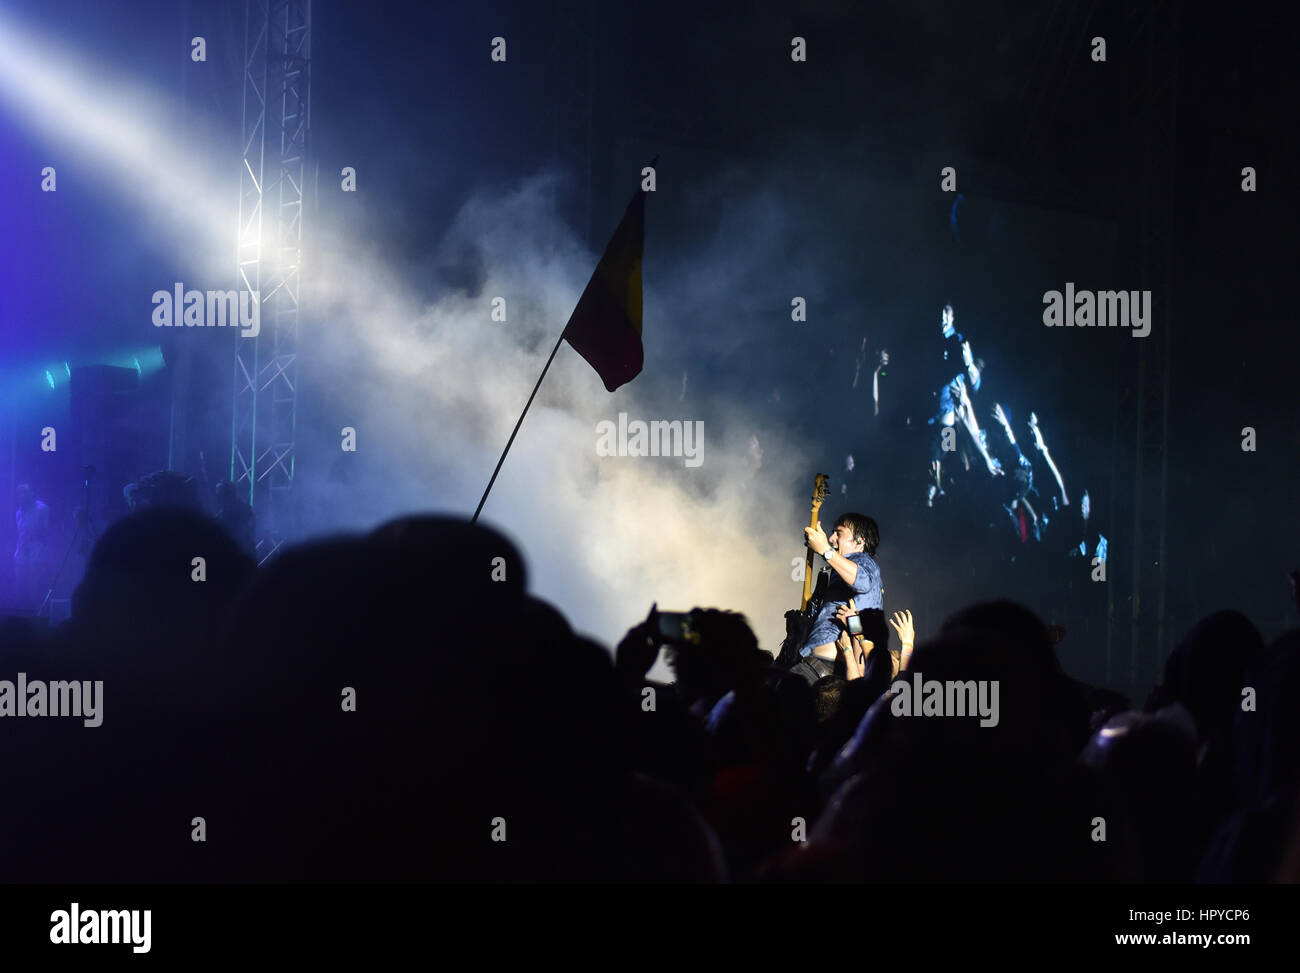 BONTIDA, ROMANIA - JULY 15, 2016: Bass guitarist Chris Batten from Enter Shikari British rock band crowd surfing during a concert at Electric Castle f Stock Photo